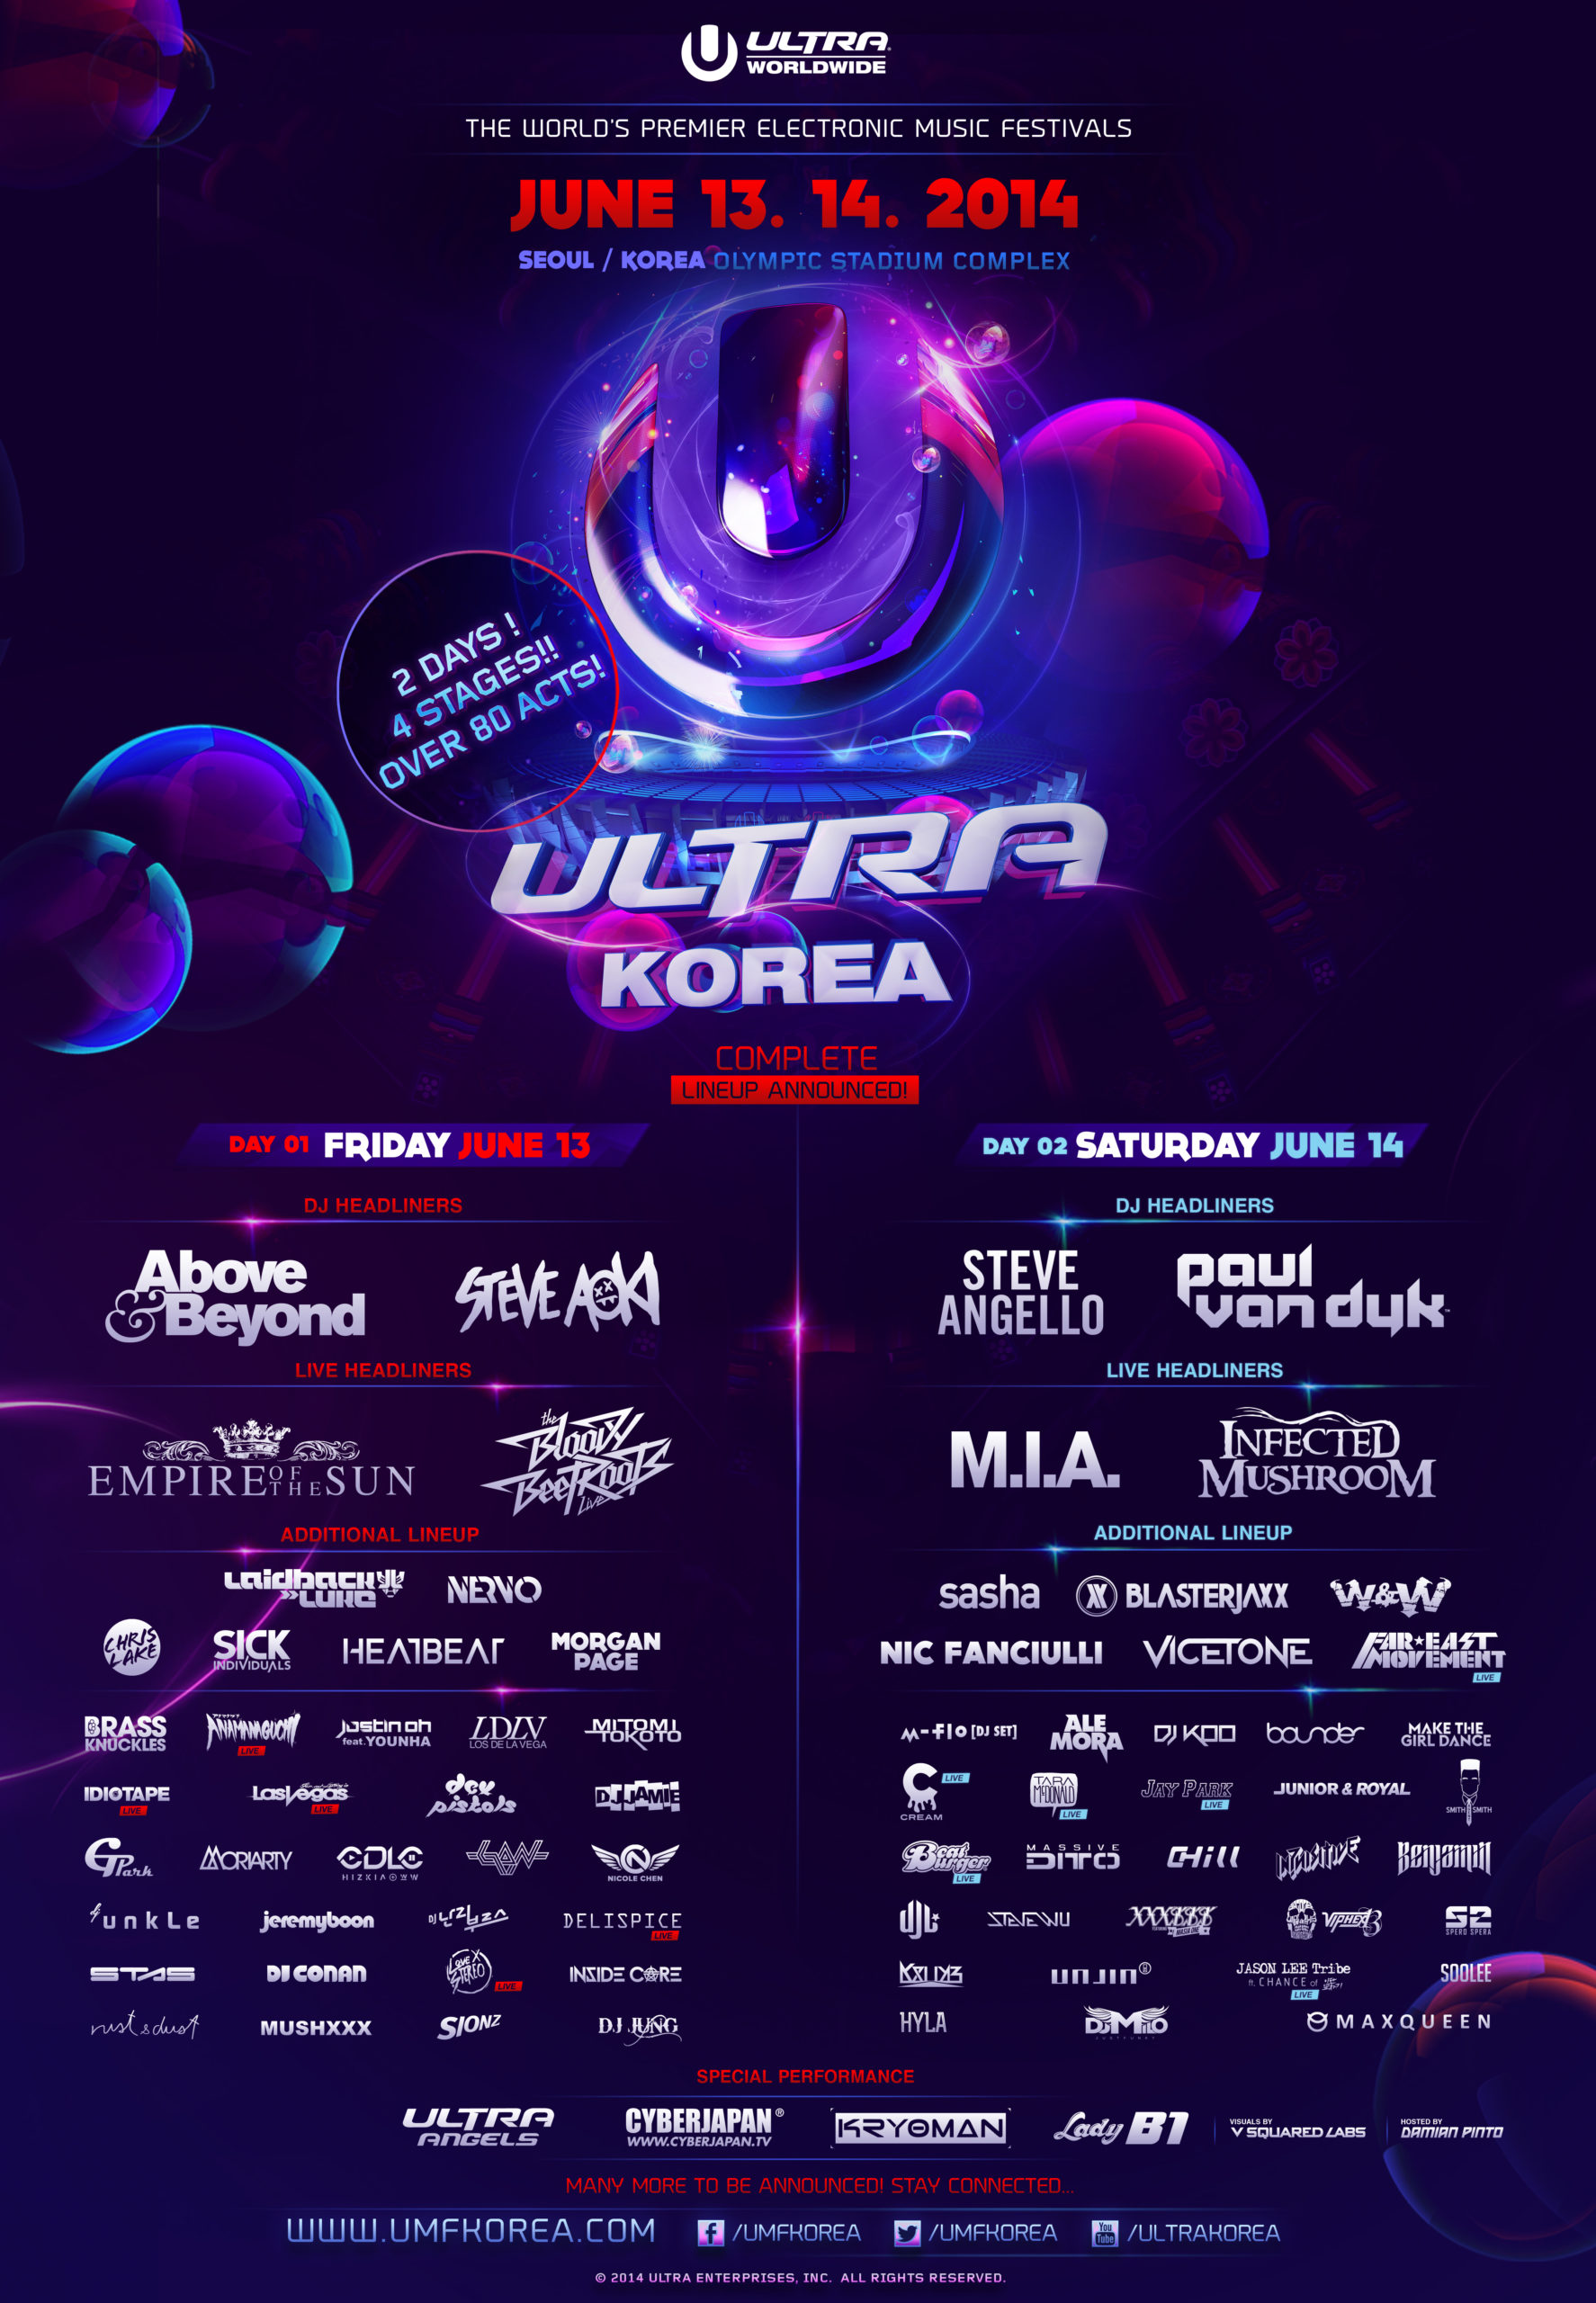 Love X Stereo performing at Ultra Music Festival Korea 2014!